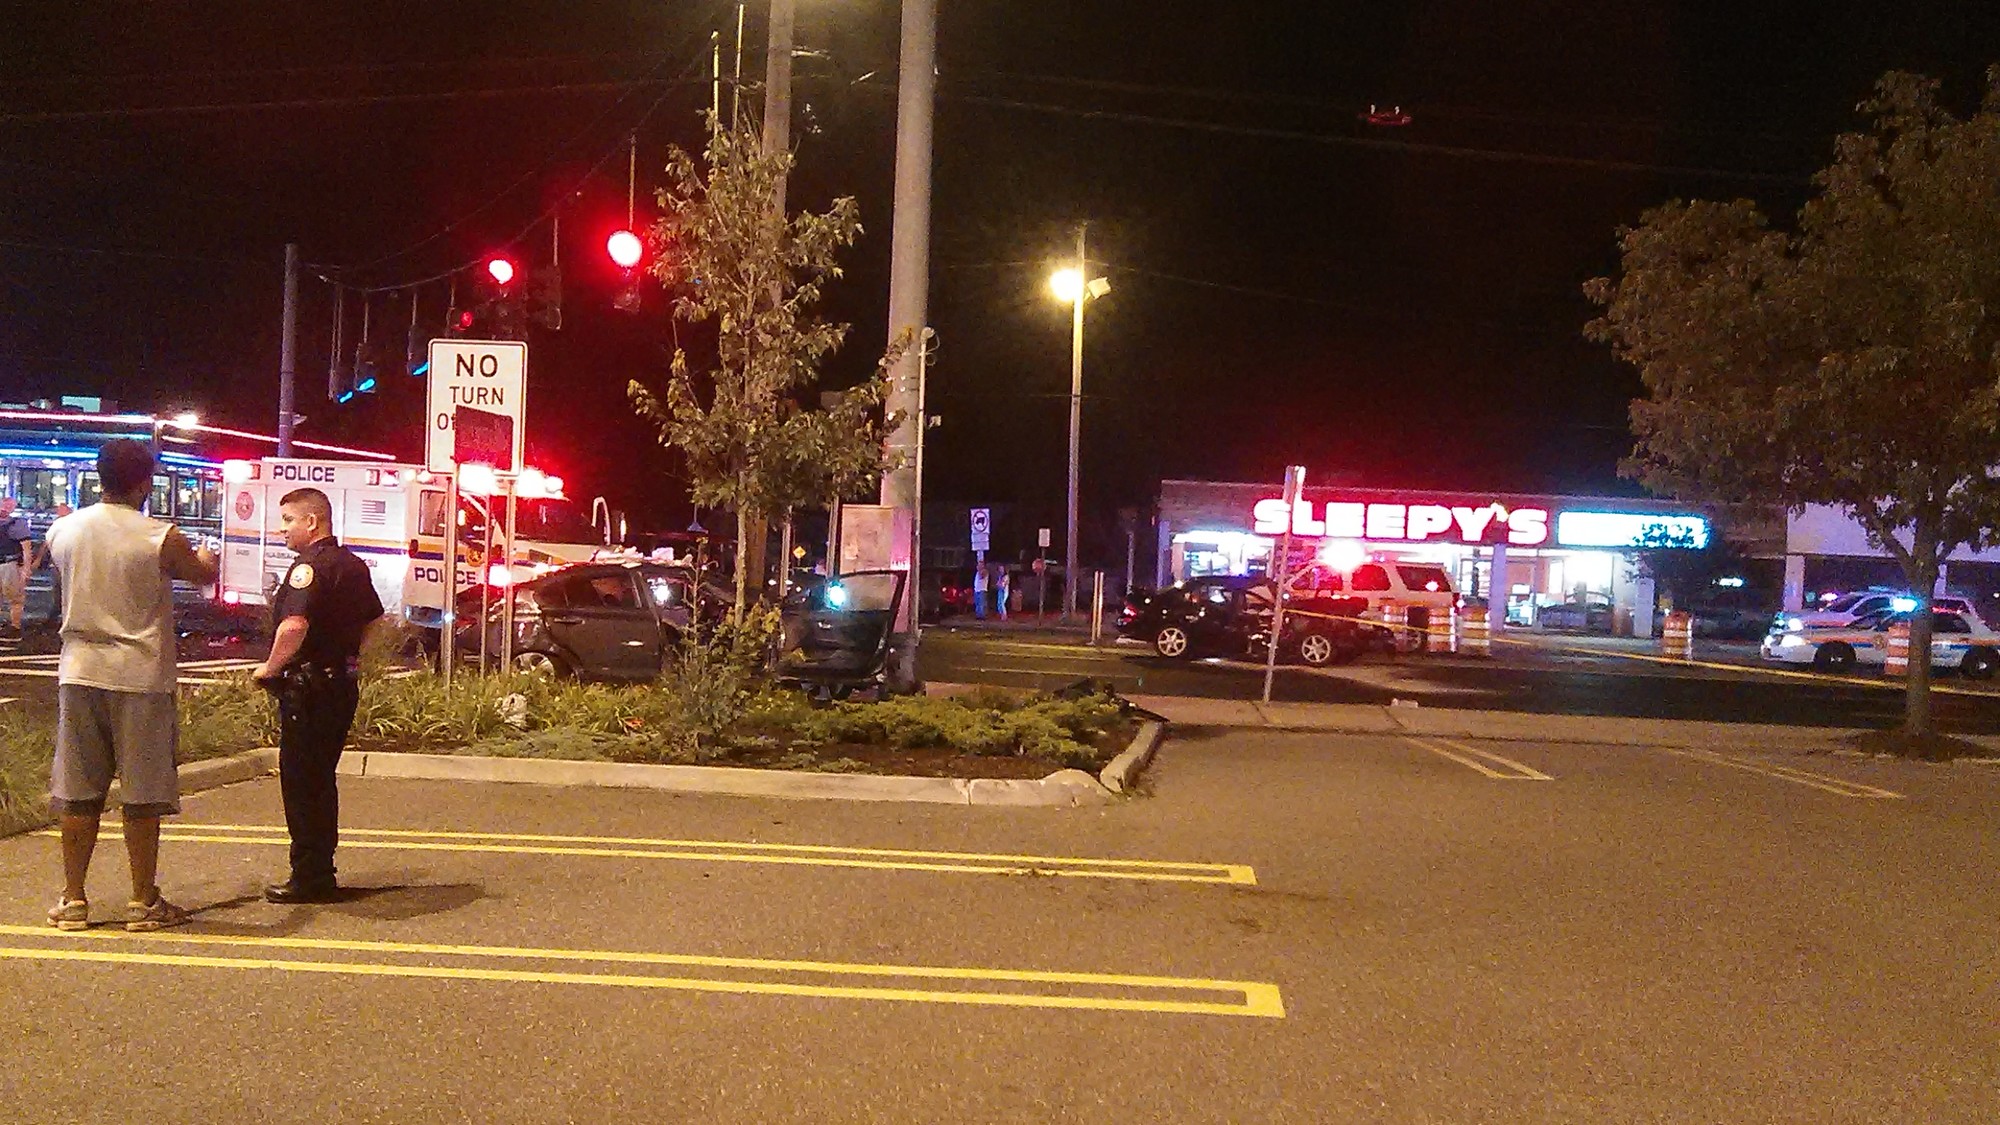 The accident occurred at 11:45 p.m. Monday Night between the intersections at Front Street and Carman Avenue.